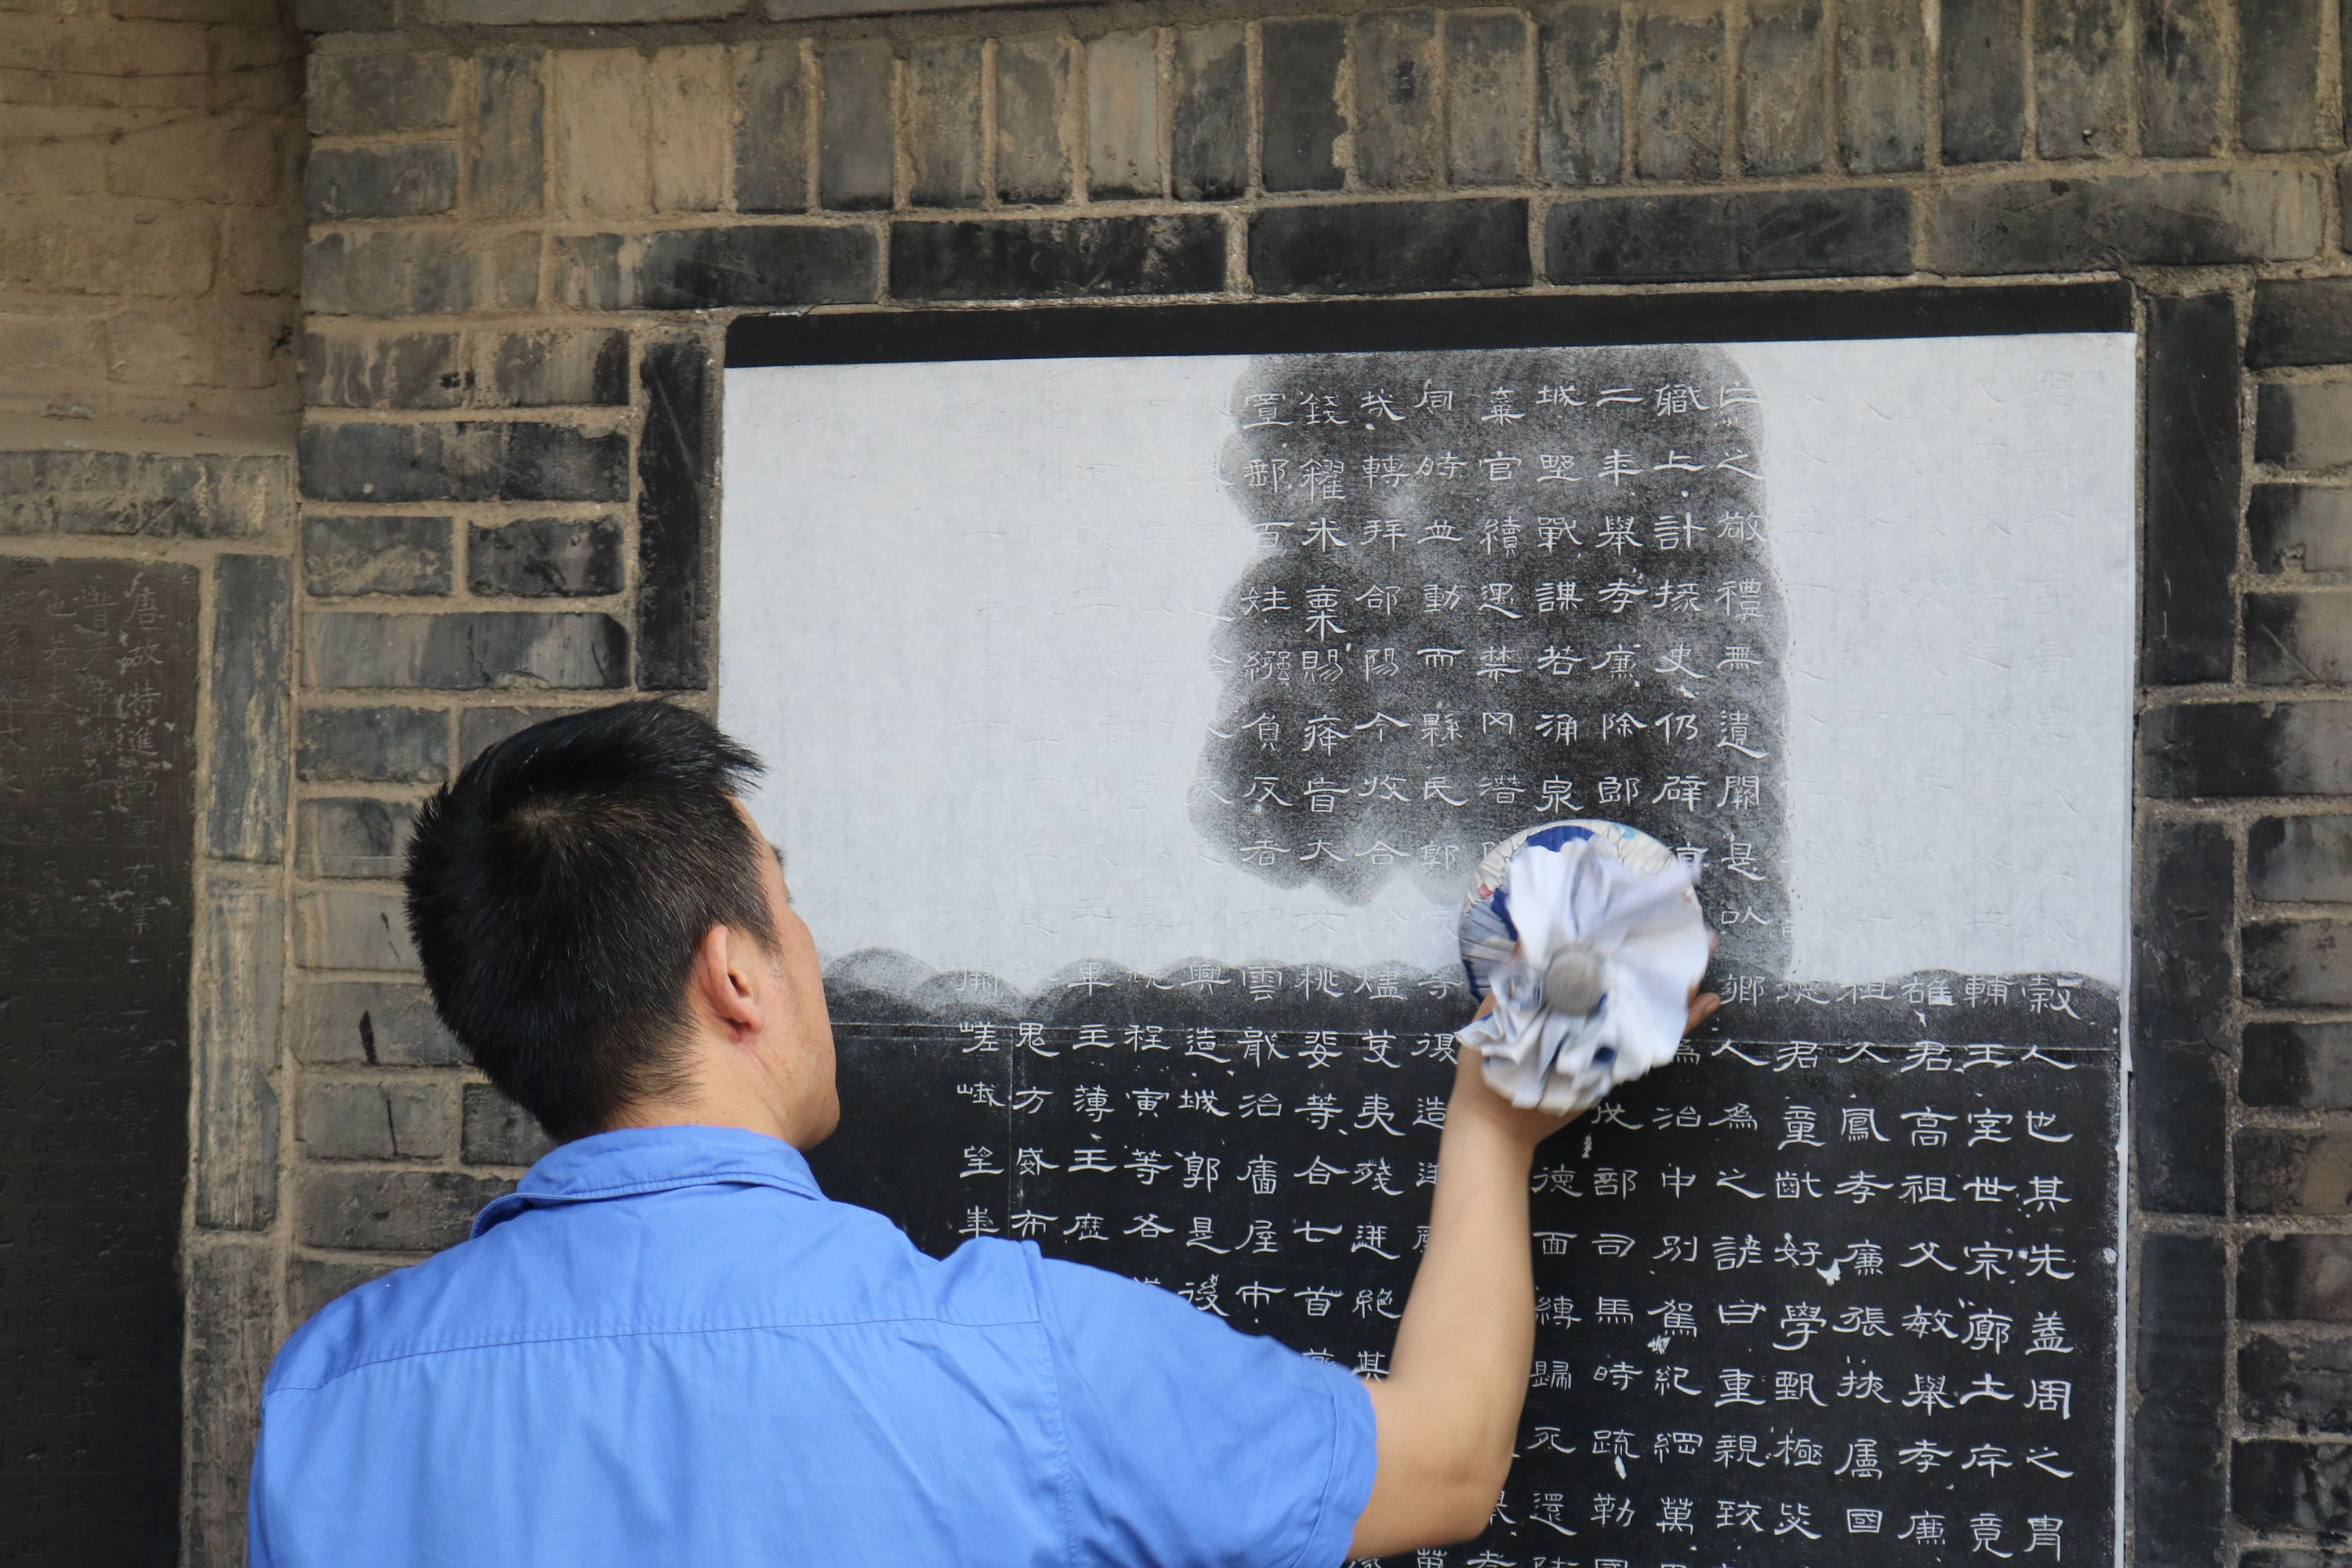 Making a stone rubbing imprint (1). The Beilin stone stelae museum in Xi'an. Photo by the author.